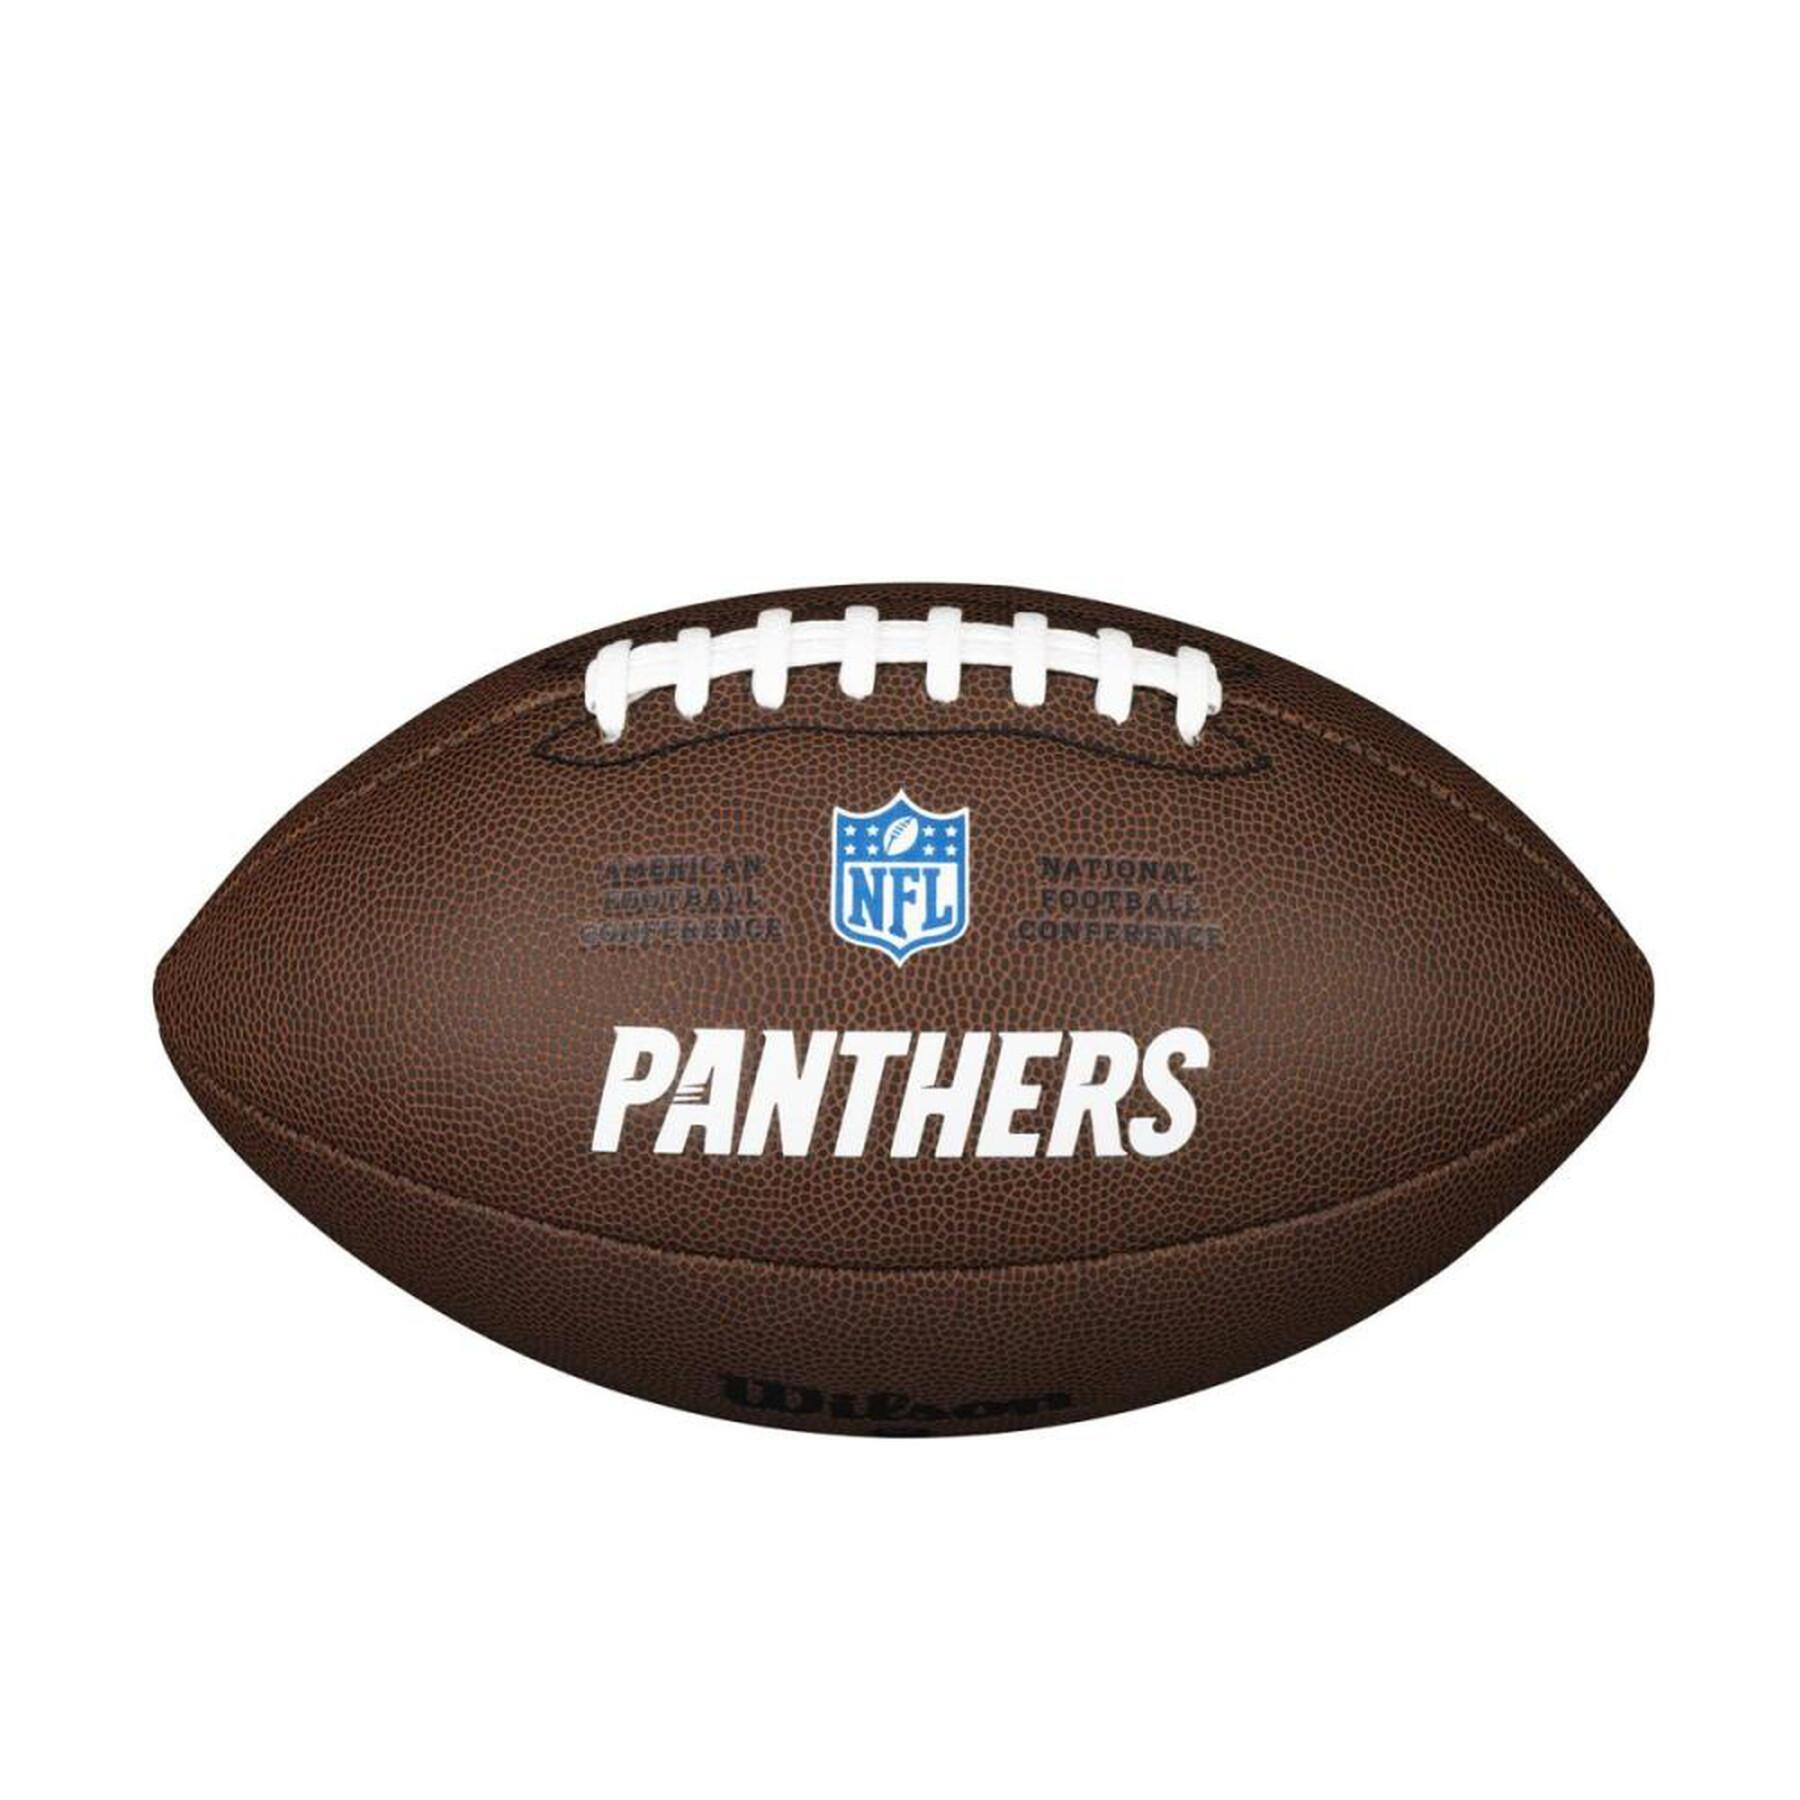 American Football Wilson Panthers NFL Licensed